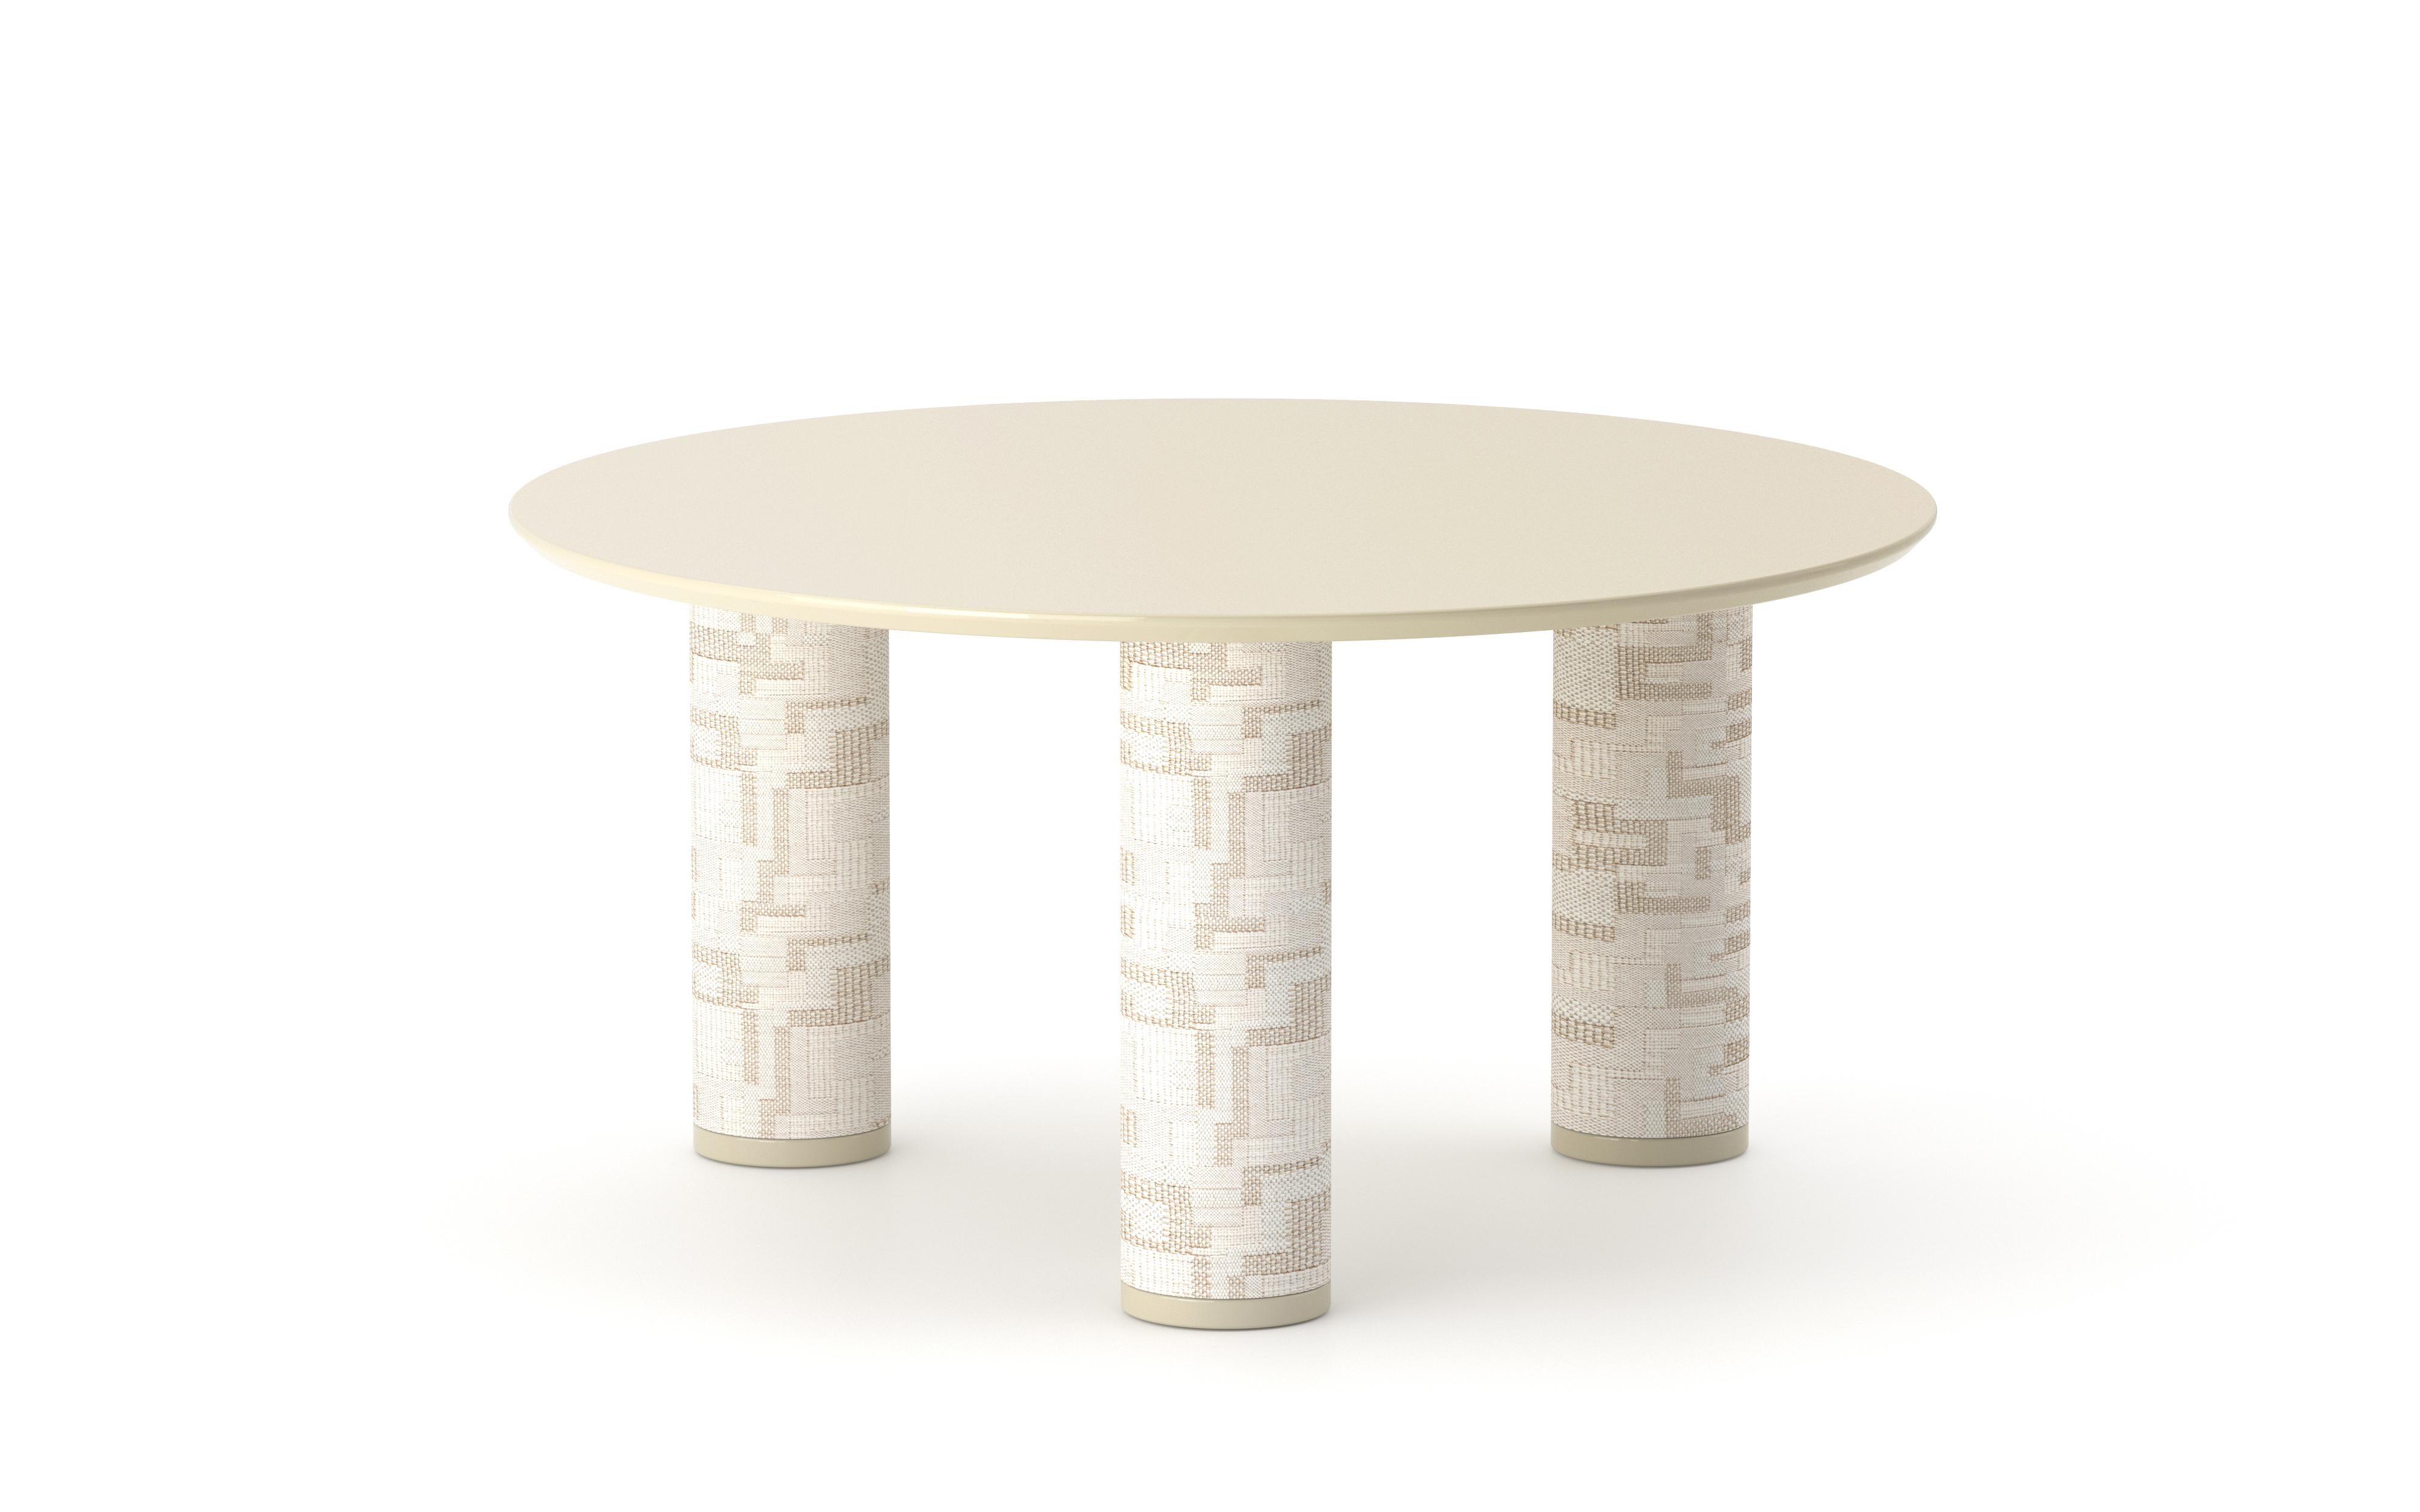 UMA Round 70 is a low table from the collection of the same name designed by Ludovica+Roberto Palomba for P + C Edizioni in spring 2022.
Featuring a circular resin top, UMA Round 70 puts the design accent on the table’s cylindrical pedestal legs